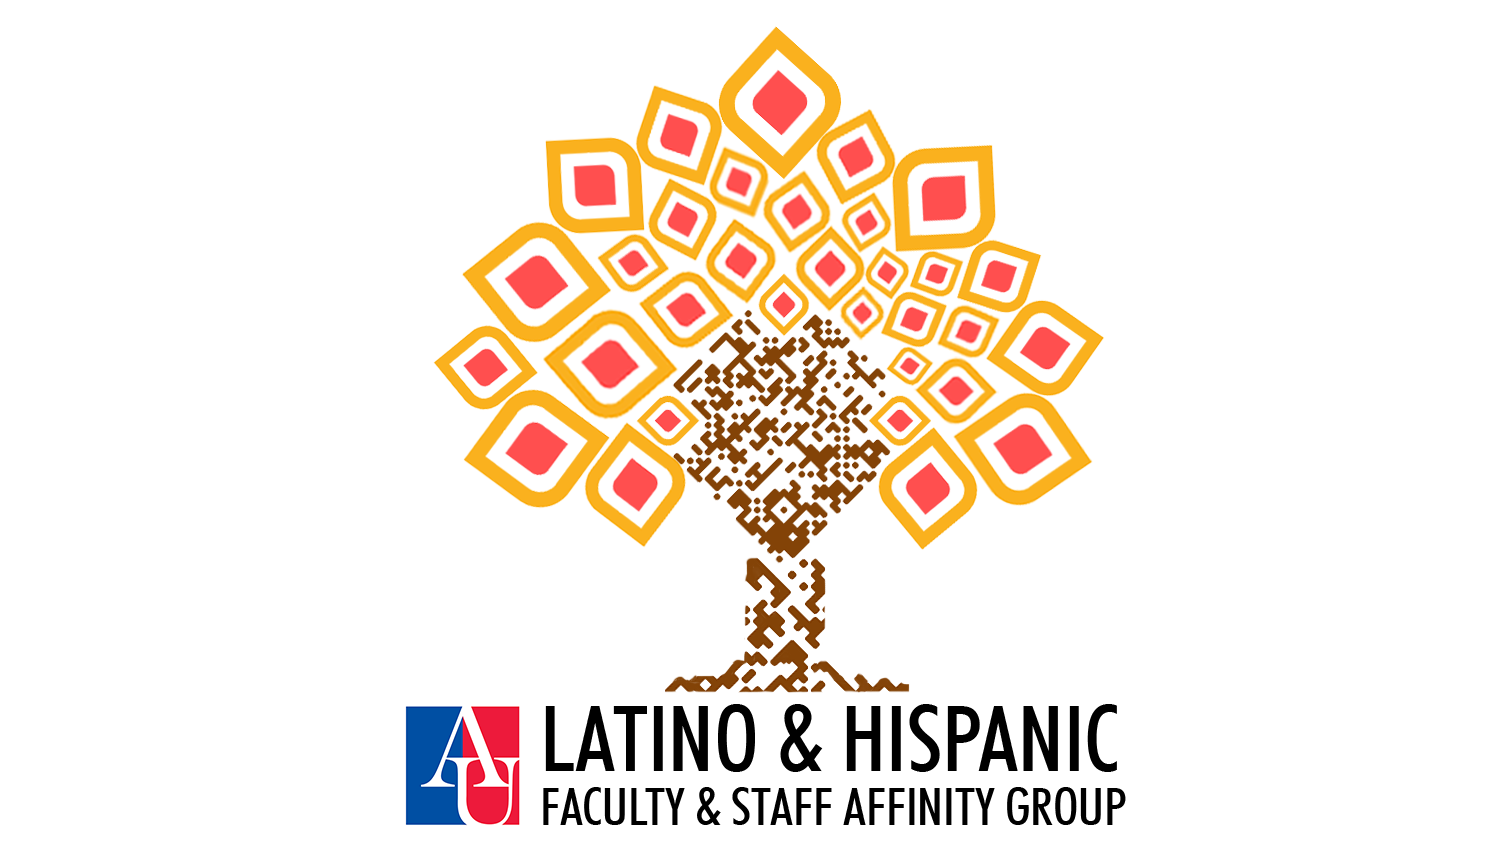 American University's Latino and Hispanic Faculty & Staff Affinity Group